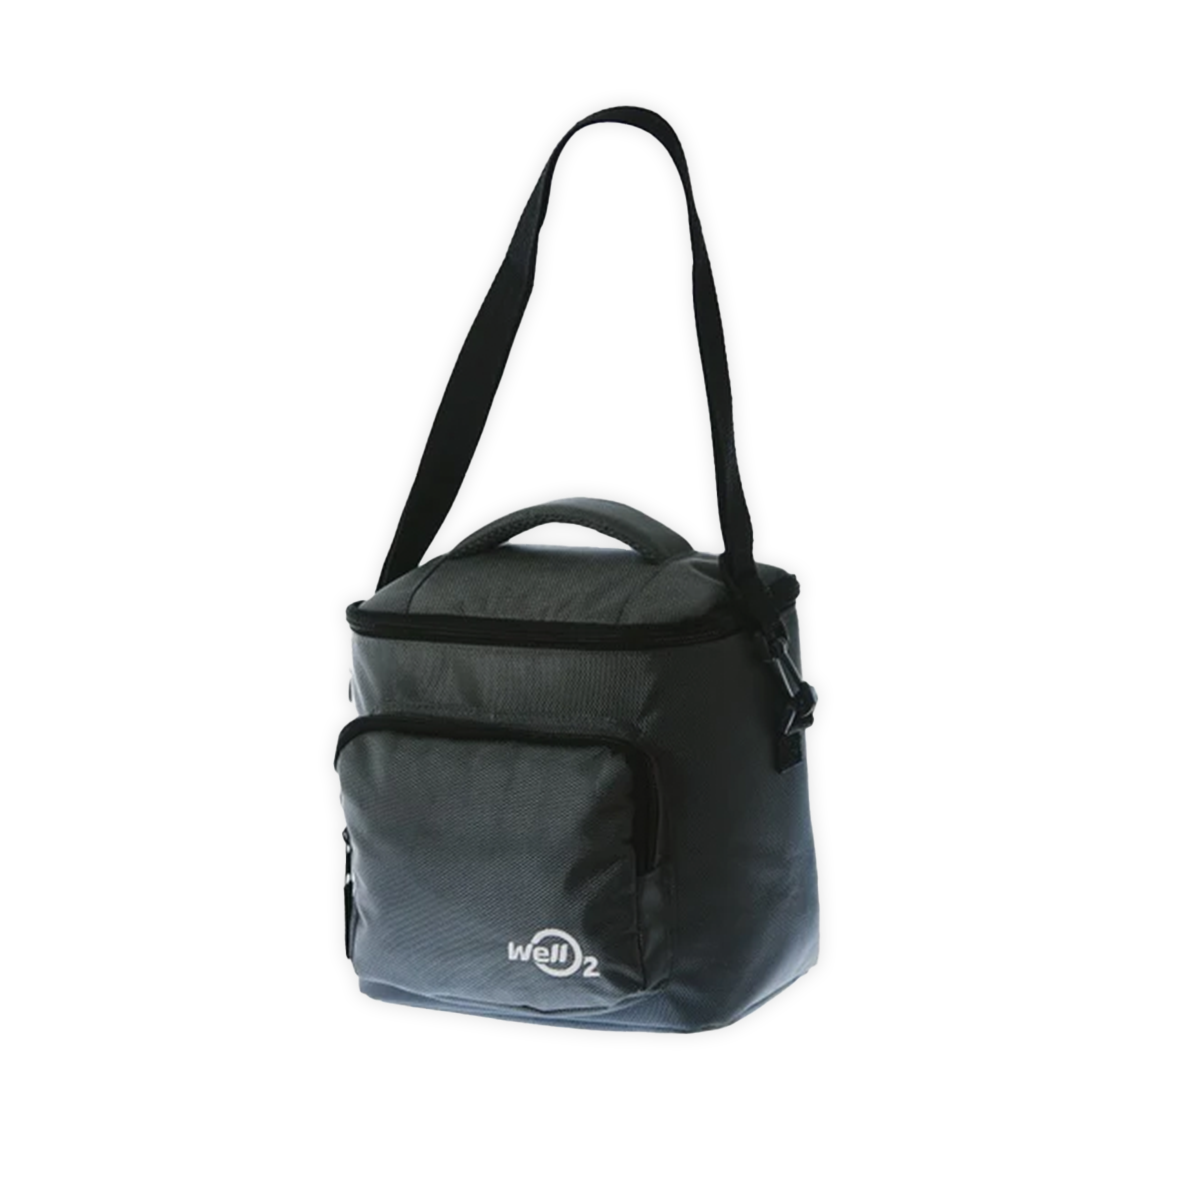 WellO2 carrying bag with white background